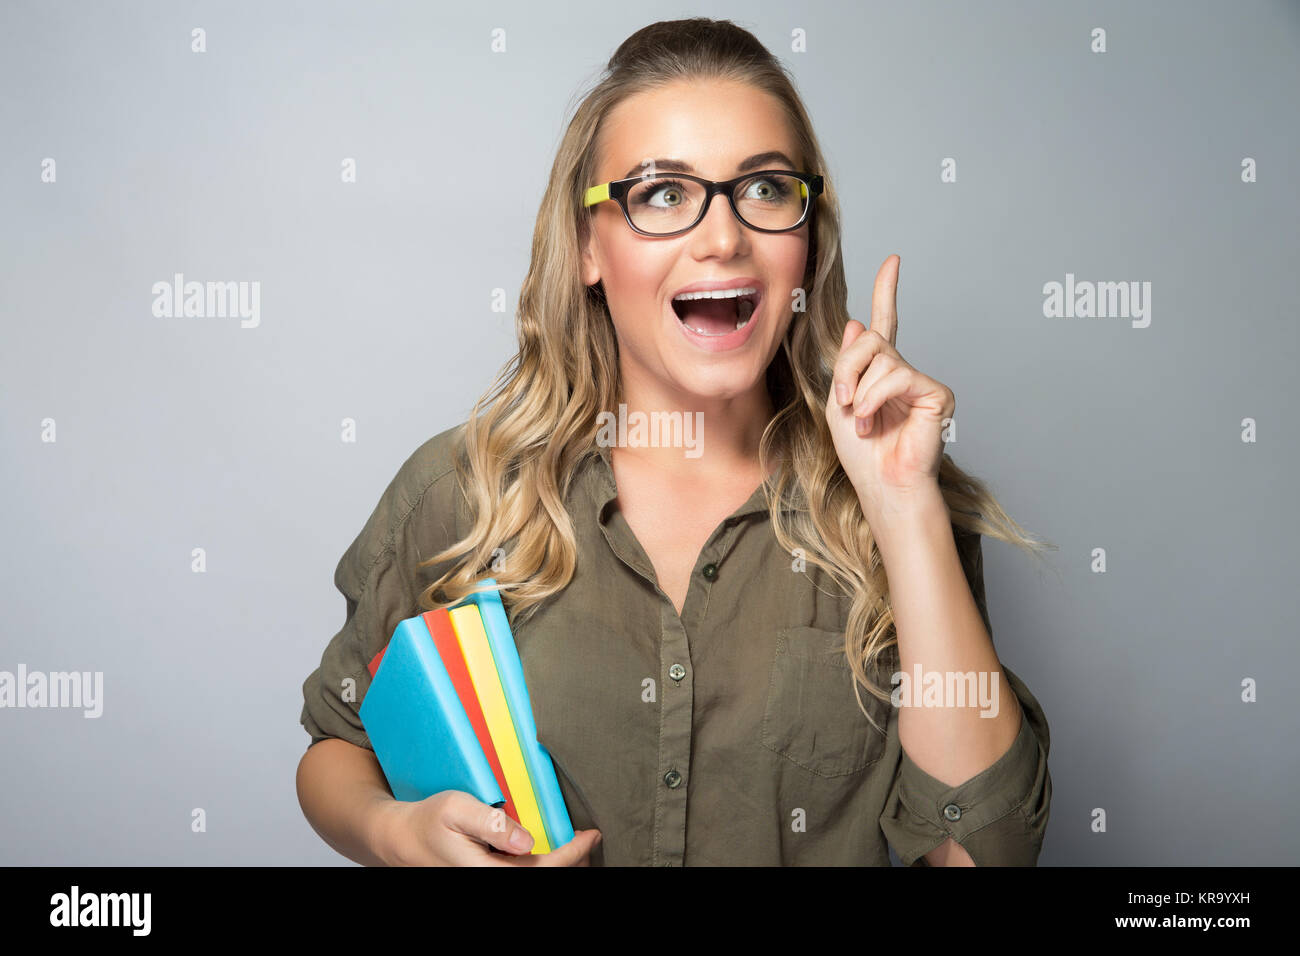 Clever student girl Stock Photo - Alamy